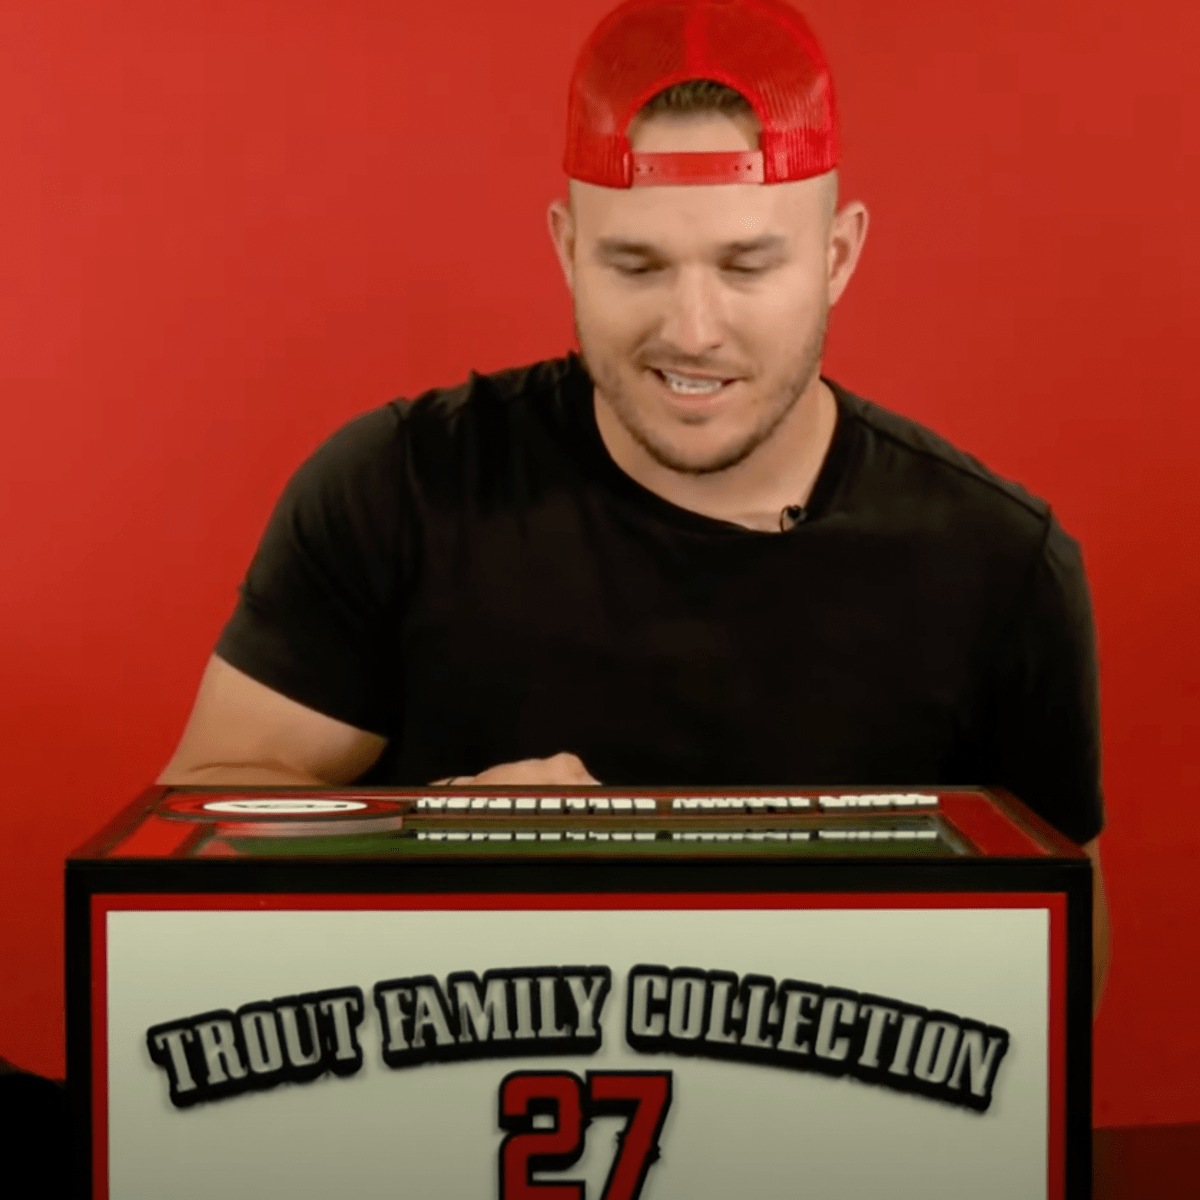 VIEW: Mike Trout's amazing reaction as he views his personal baseball card  collection from PSA - Sports Collectors Digest